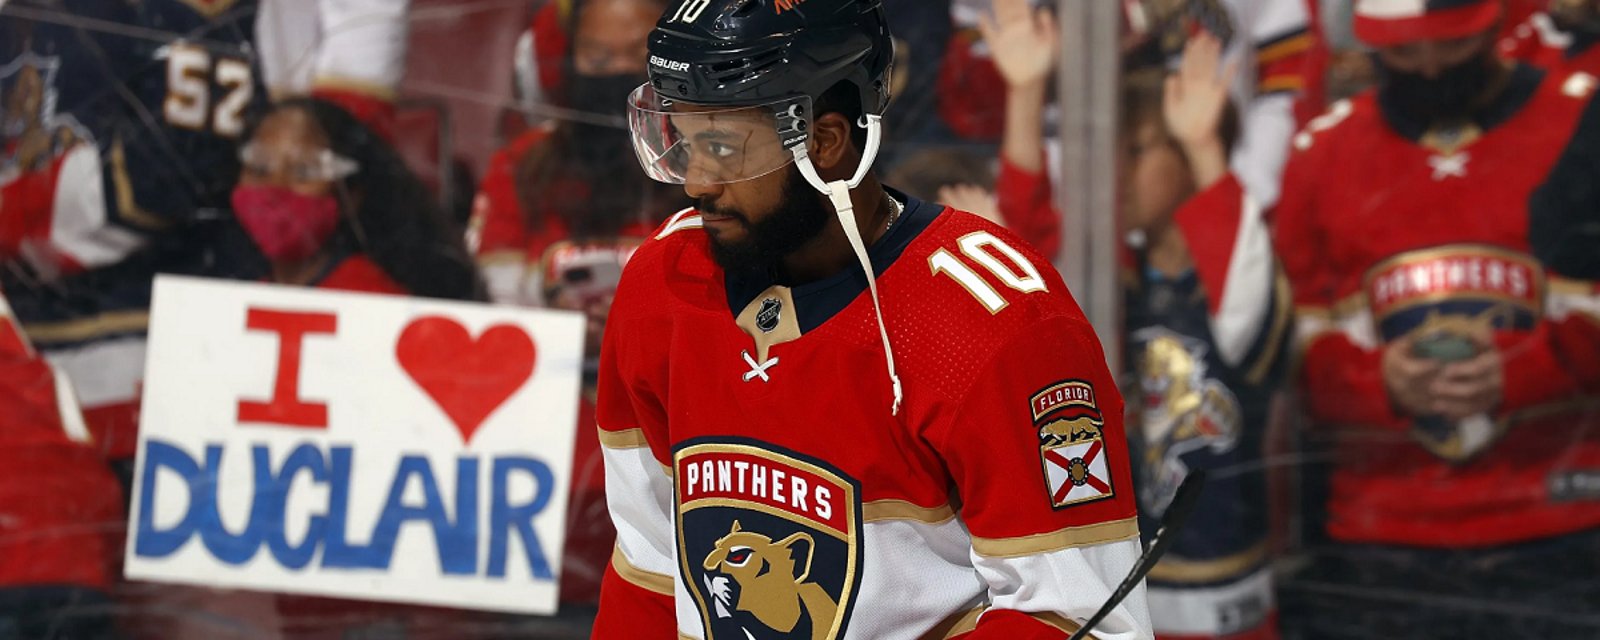 Anthony Duclair has been traded on Day 1 of free agency!